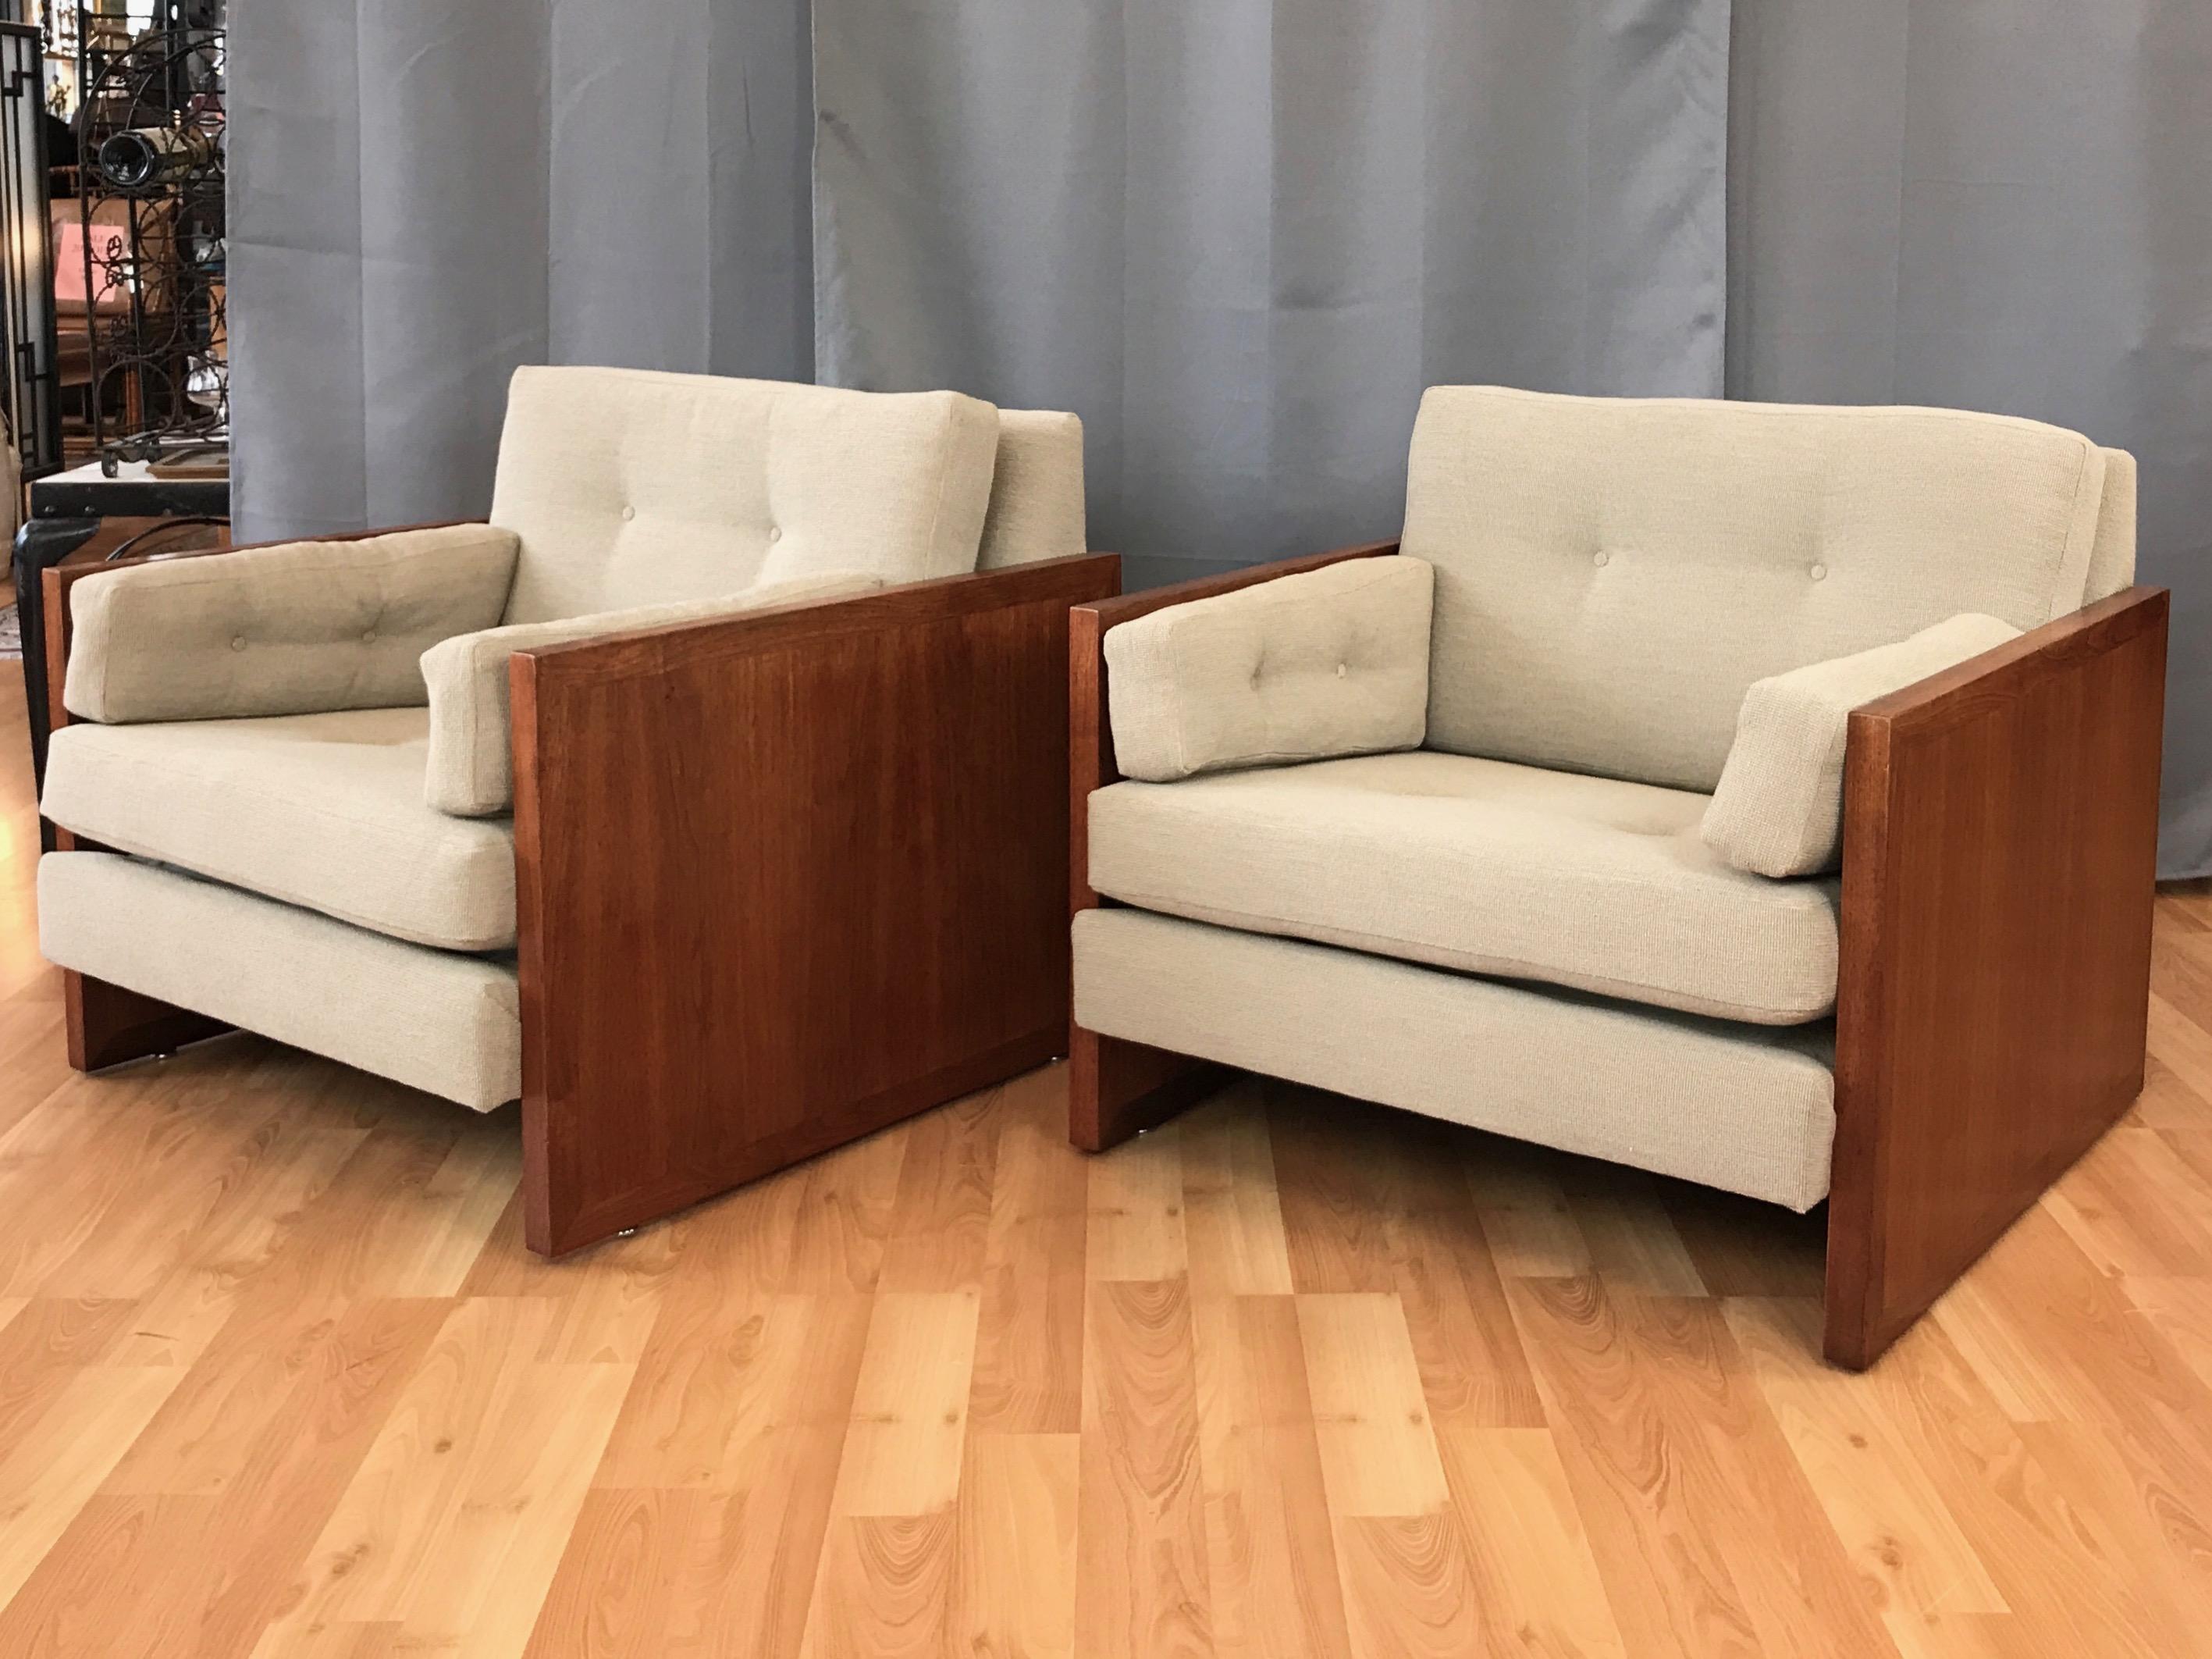 An exceptionally handsome pair of vintage walnut cube lounge chairs in the style of Milo Baughman.

Cased sides of bookmatched walnut with flush frame border detail support a comfortably canted seat and back. Tufted cushions freshly reupholstered